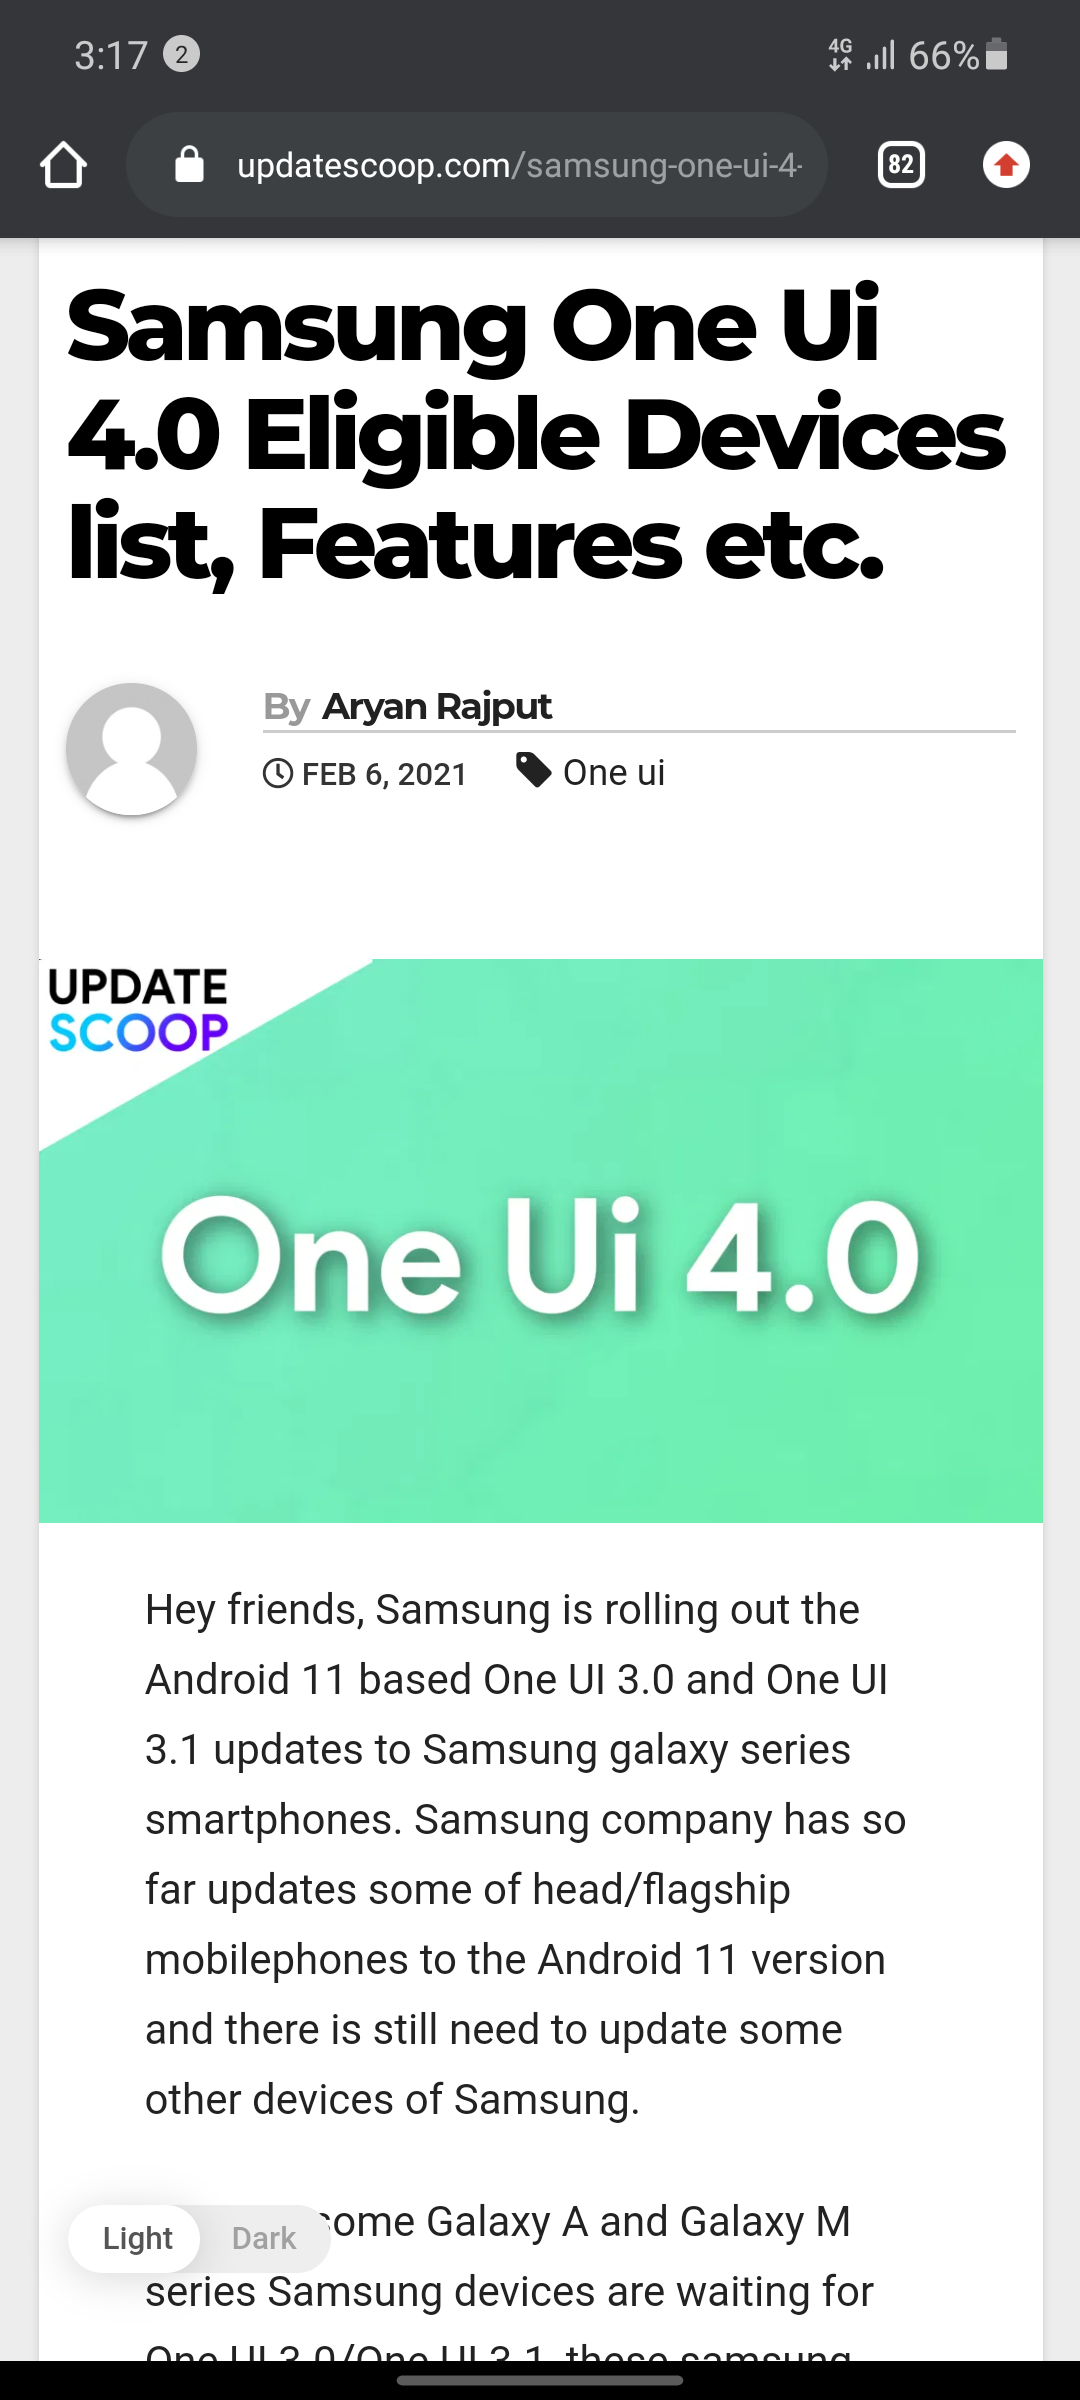 Galaxy devices that will be eligible for the One UI 4.0 (Android